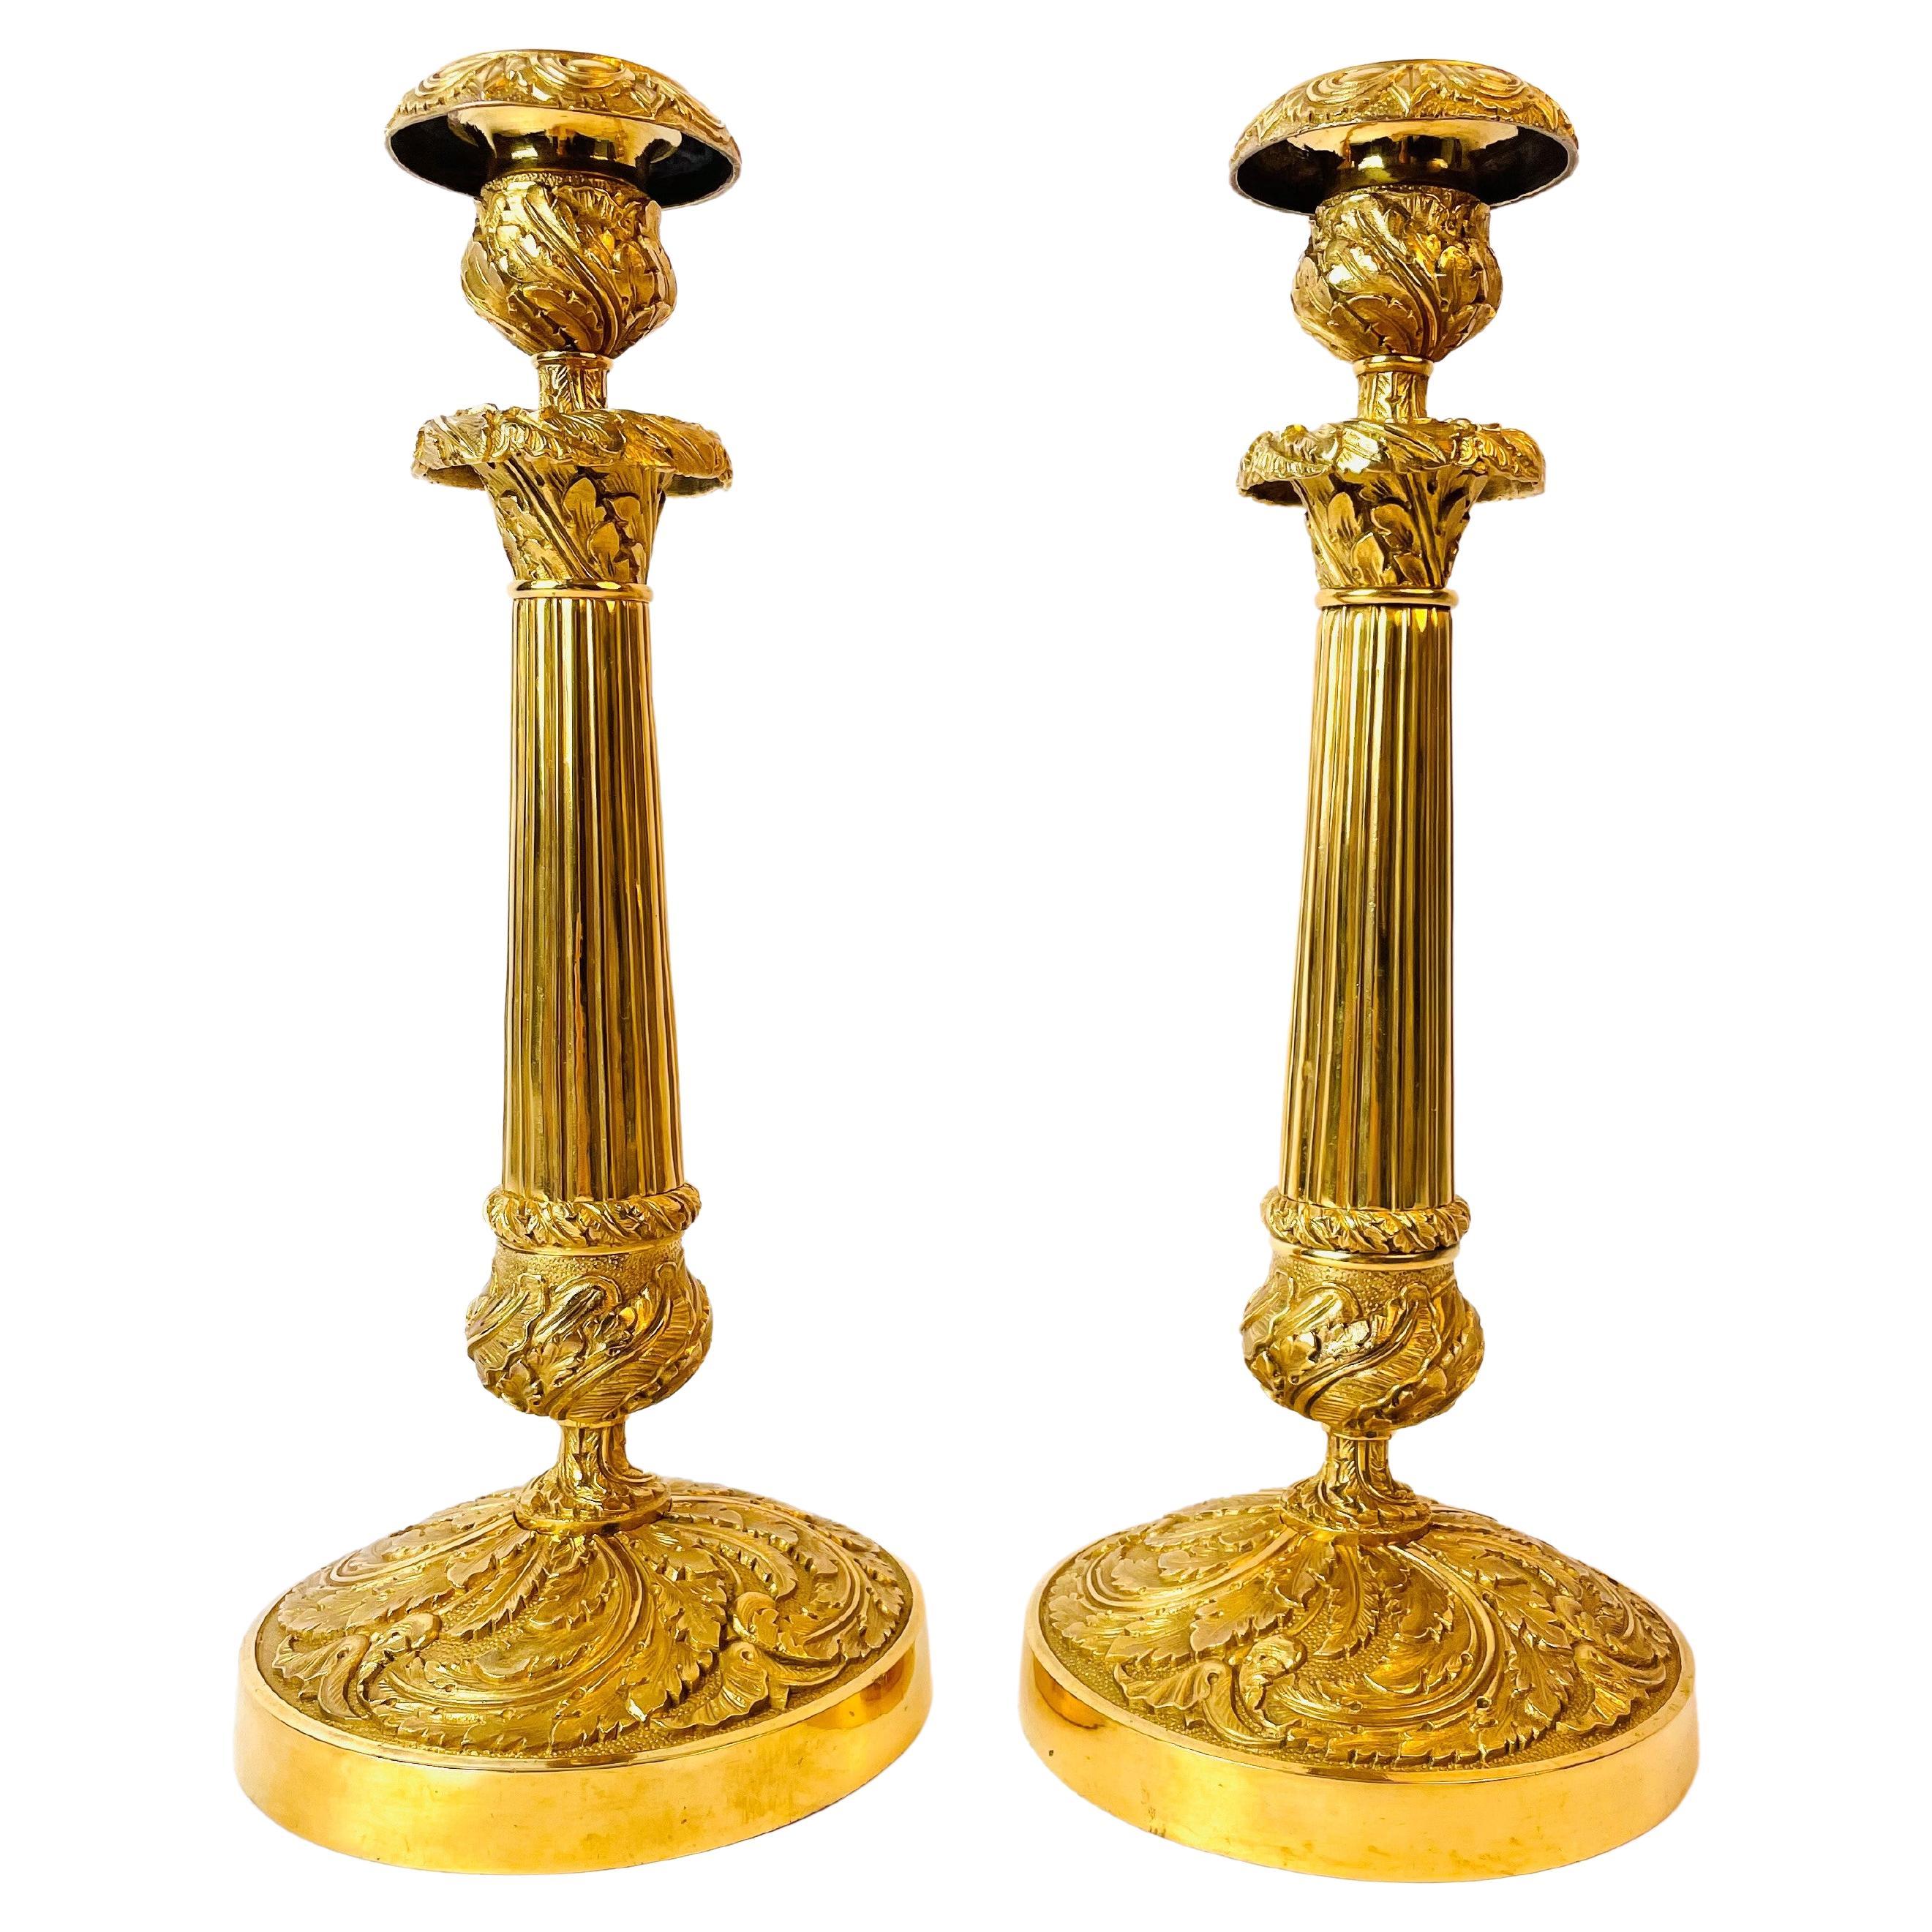 Large Pair of Gilt Bronze Candlesticks in French Empire, circa 1820